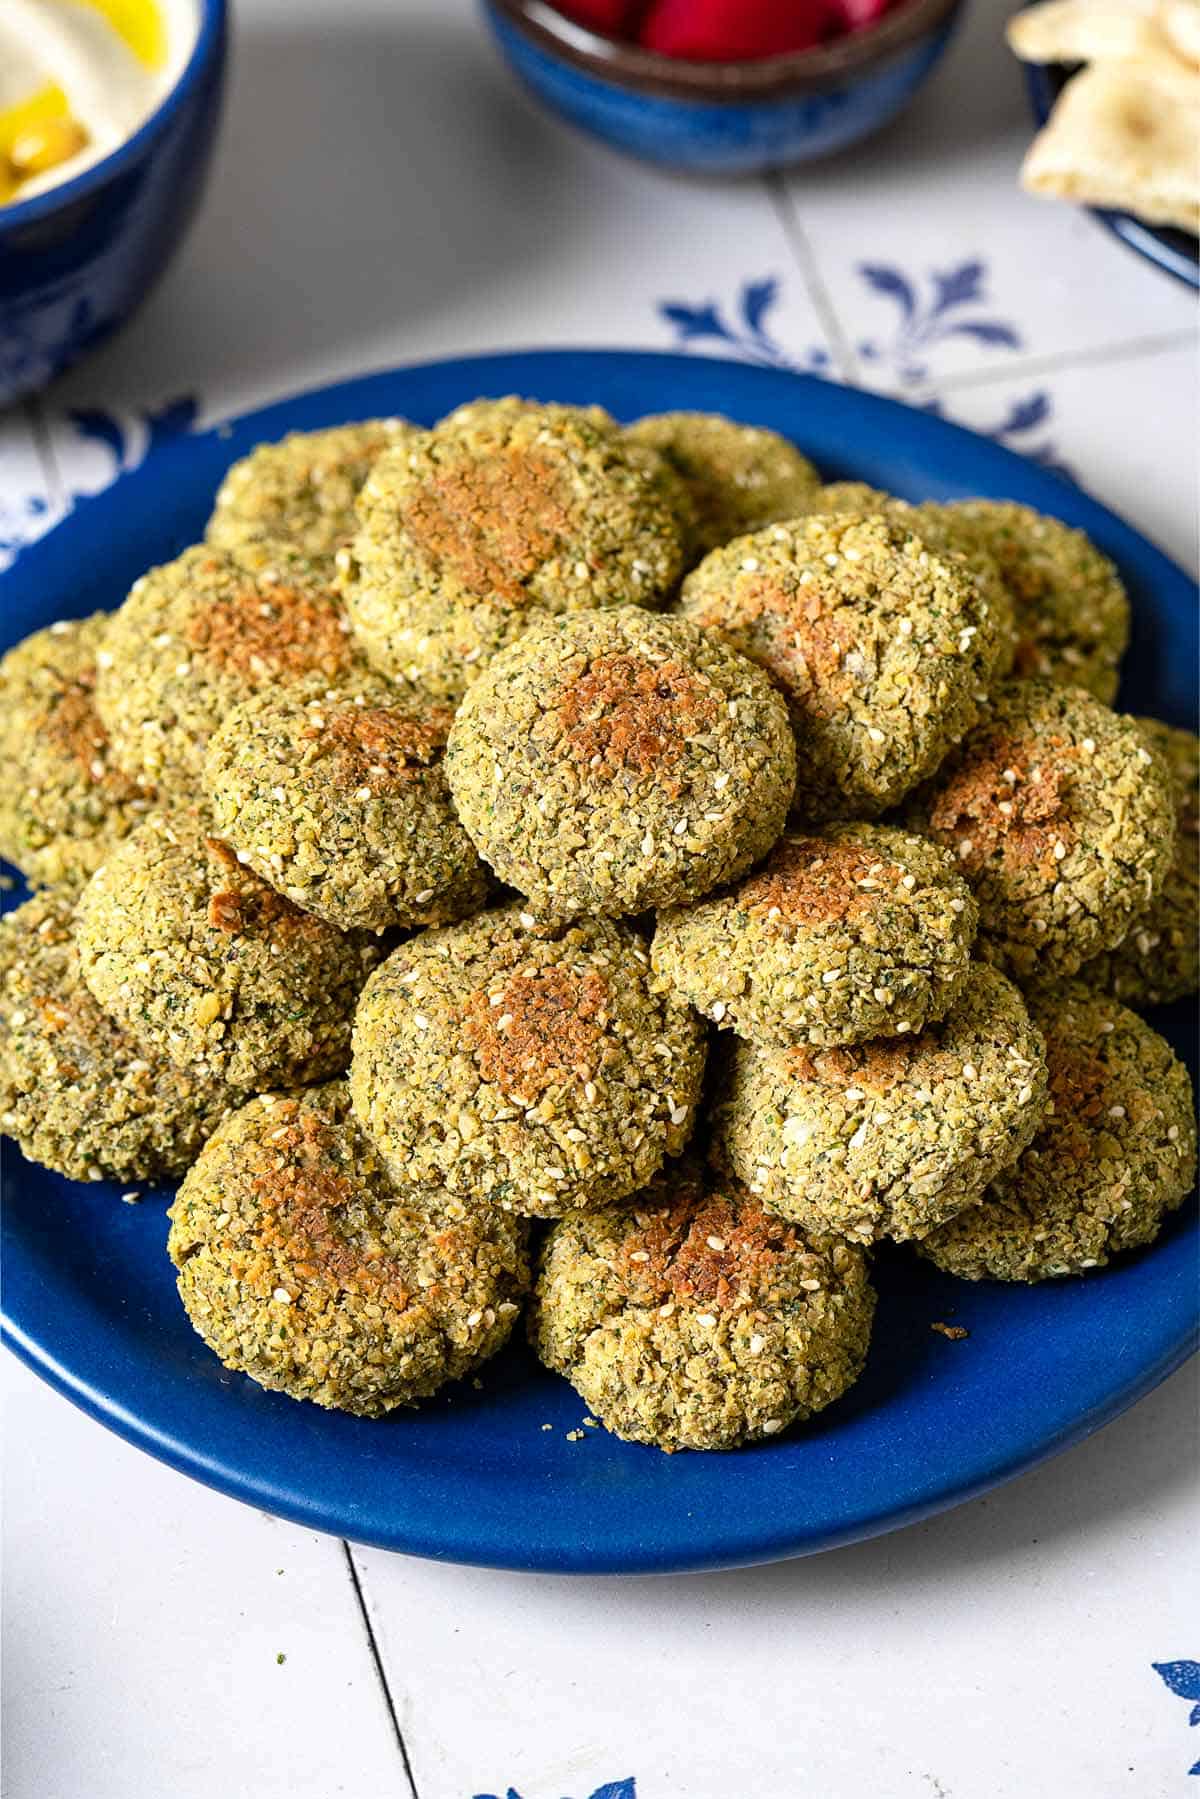 Baked Falafel Recipe- Step by Step Guide